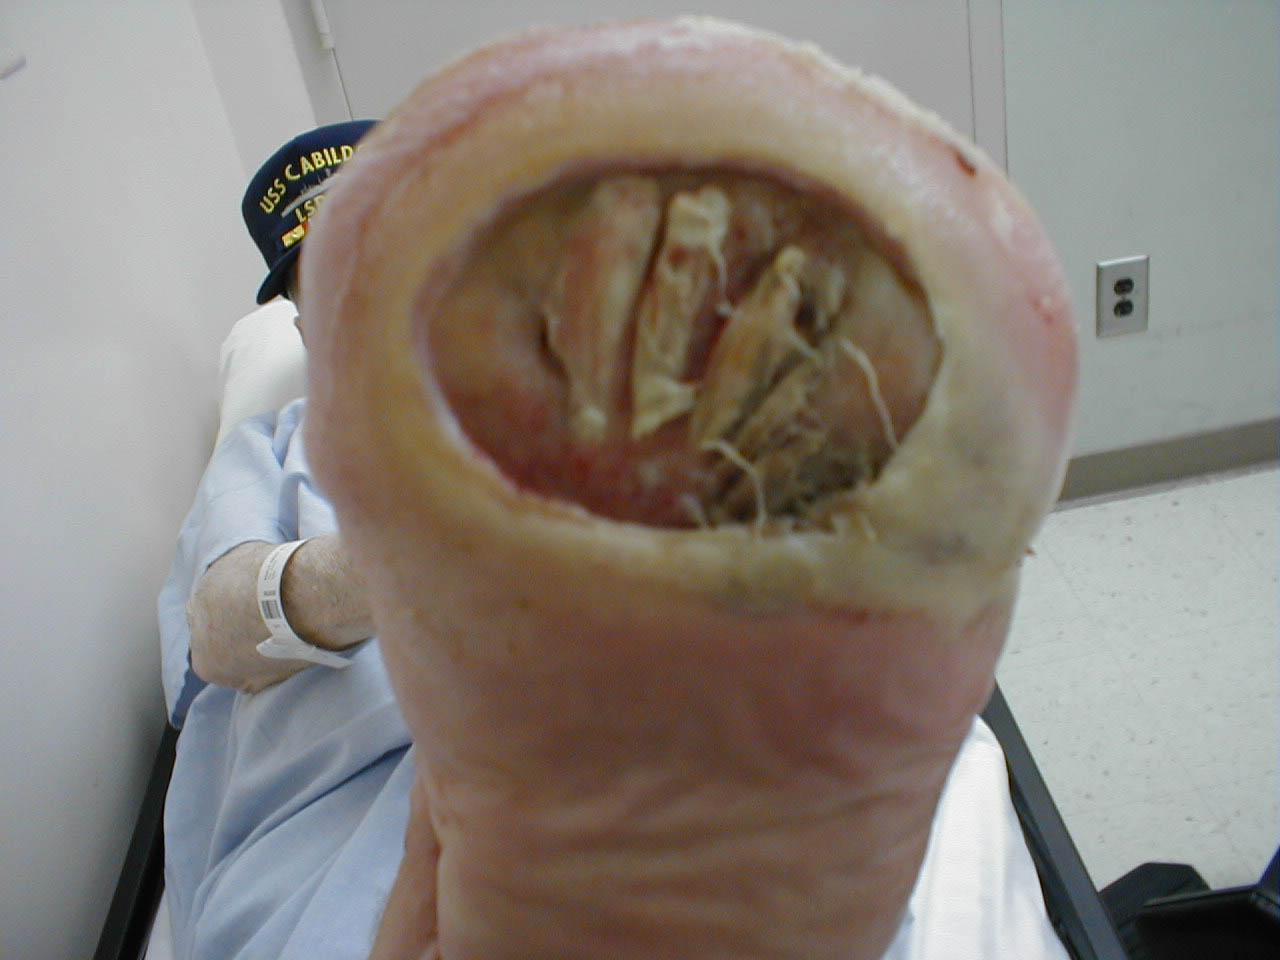 Diabetes induced neuropathy has lead to large, painless ulcer on bottom of foot. Patient has had toes removed several years earlier due to prior infection.